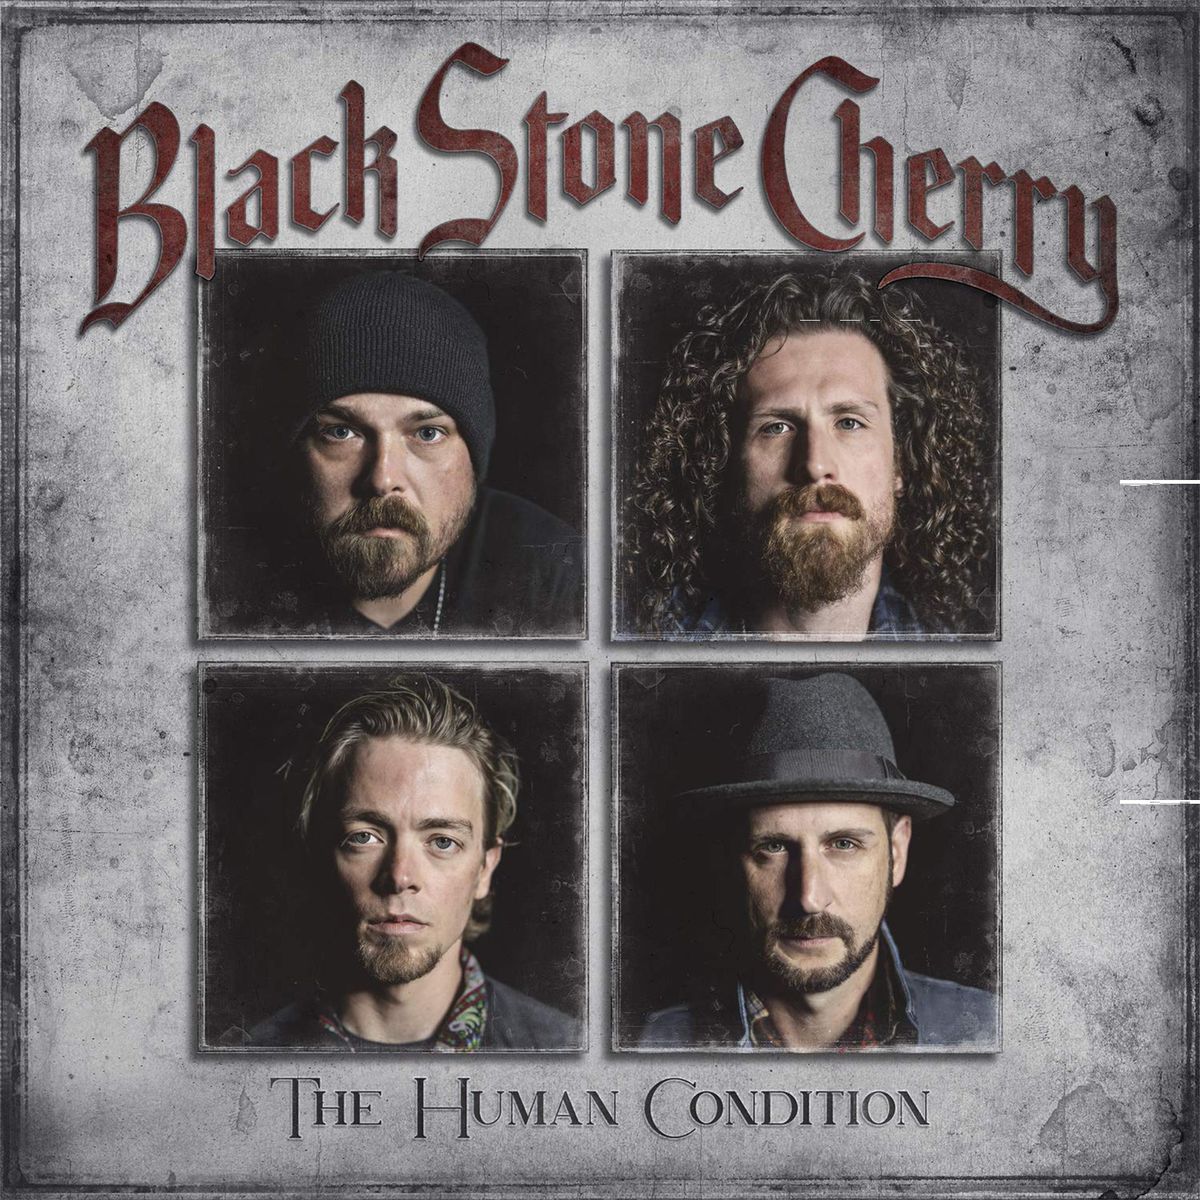 Music Monday - Black Stone Cherry - The Human Condition - New Music New Album New Release